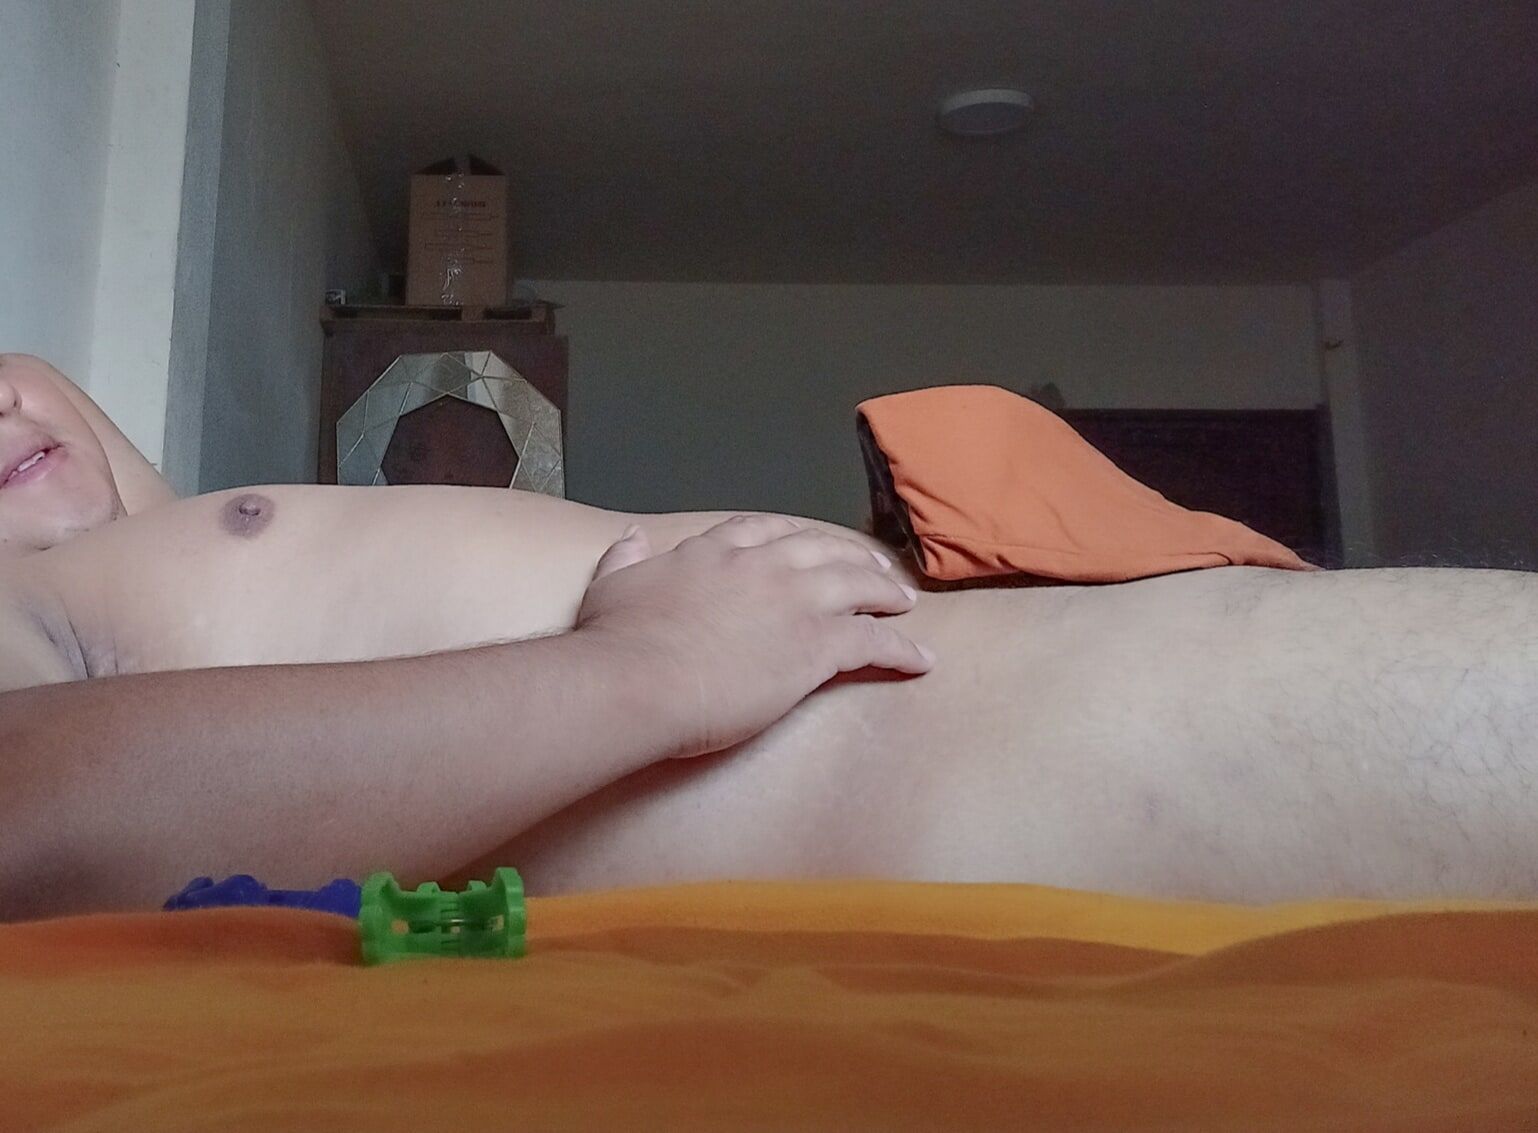 Me lying down and my penis standing - 02 (SemiNude but Nake) #21